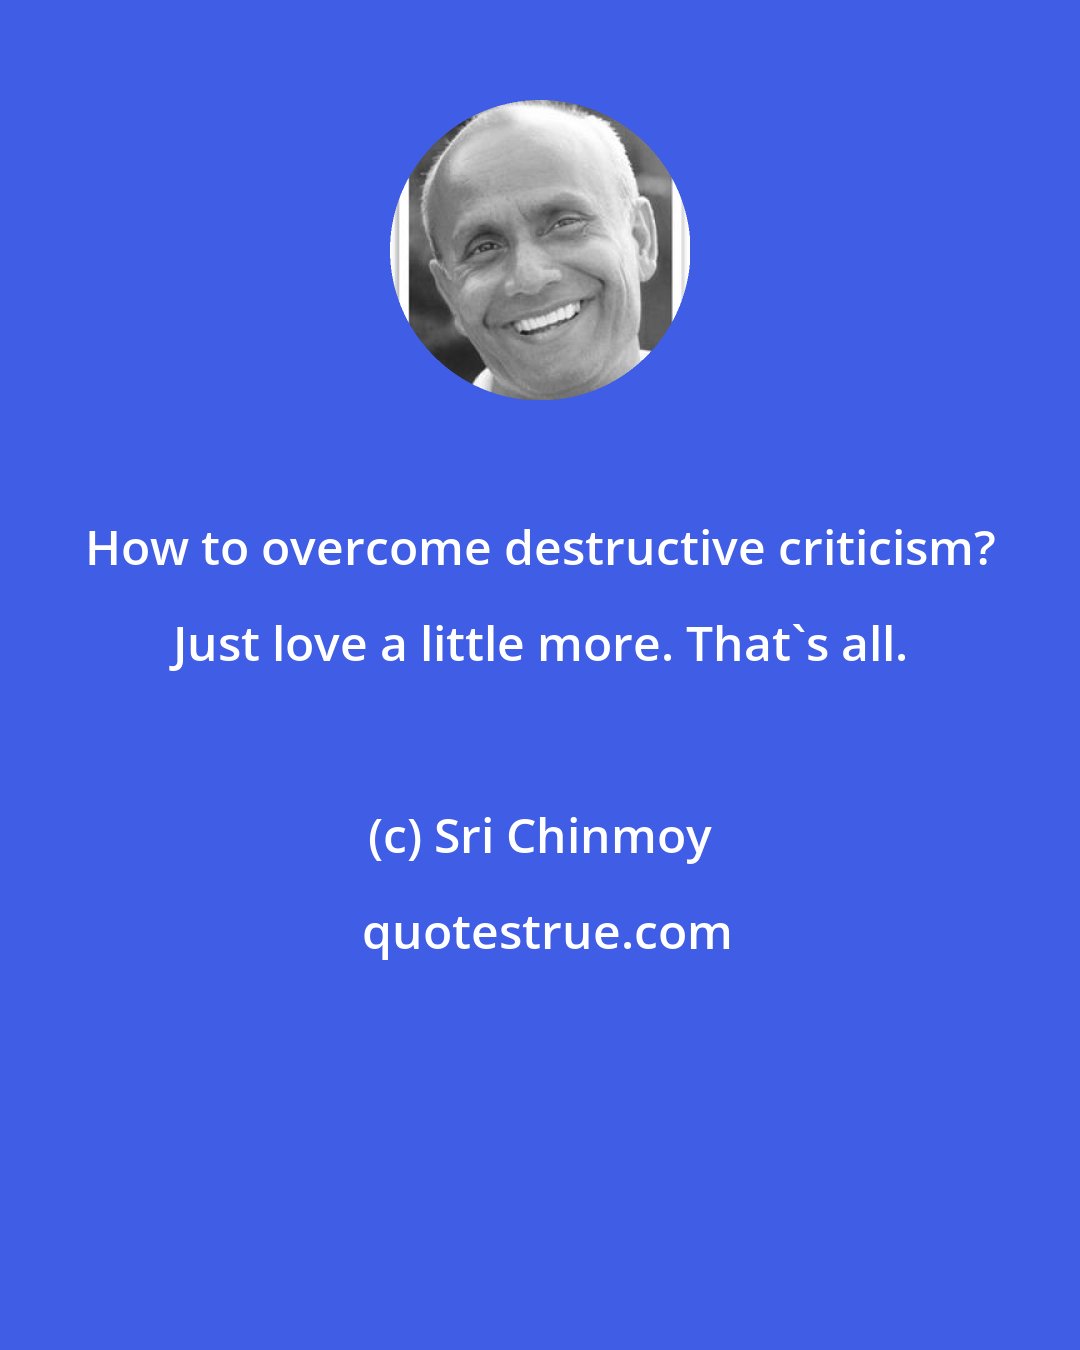 Sri Chinmoy: How to overcome destructive criticism? Just love a little more. That's all.